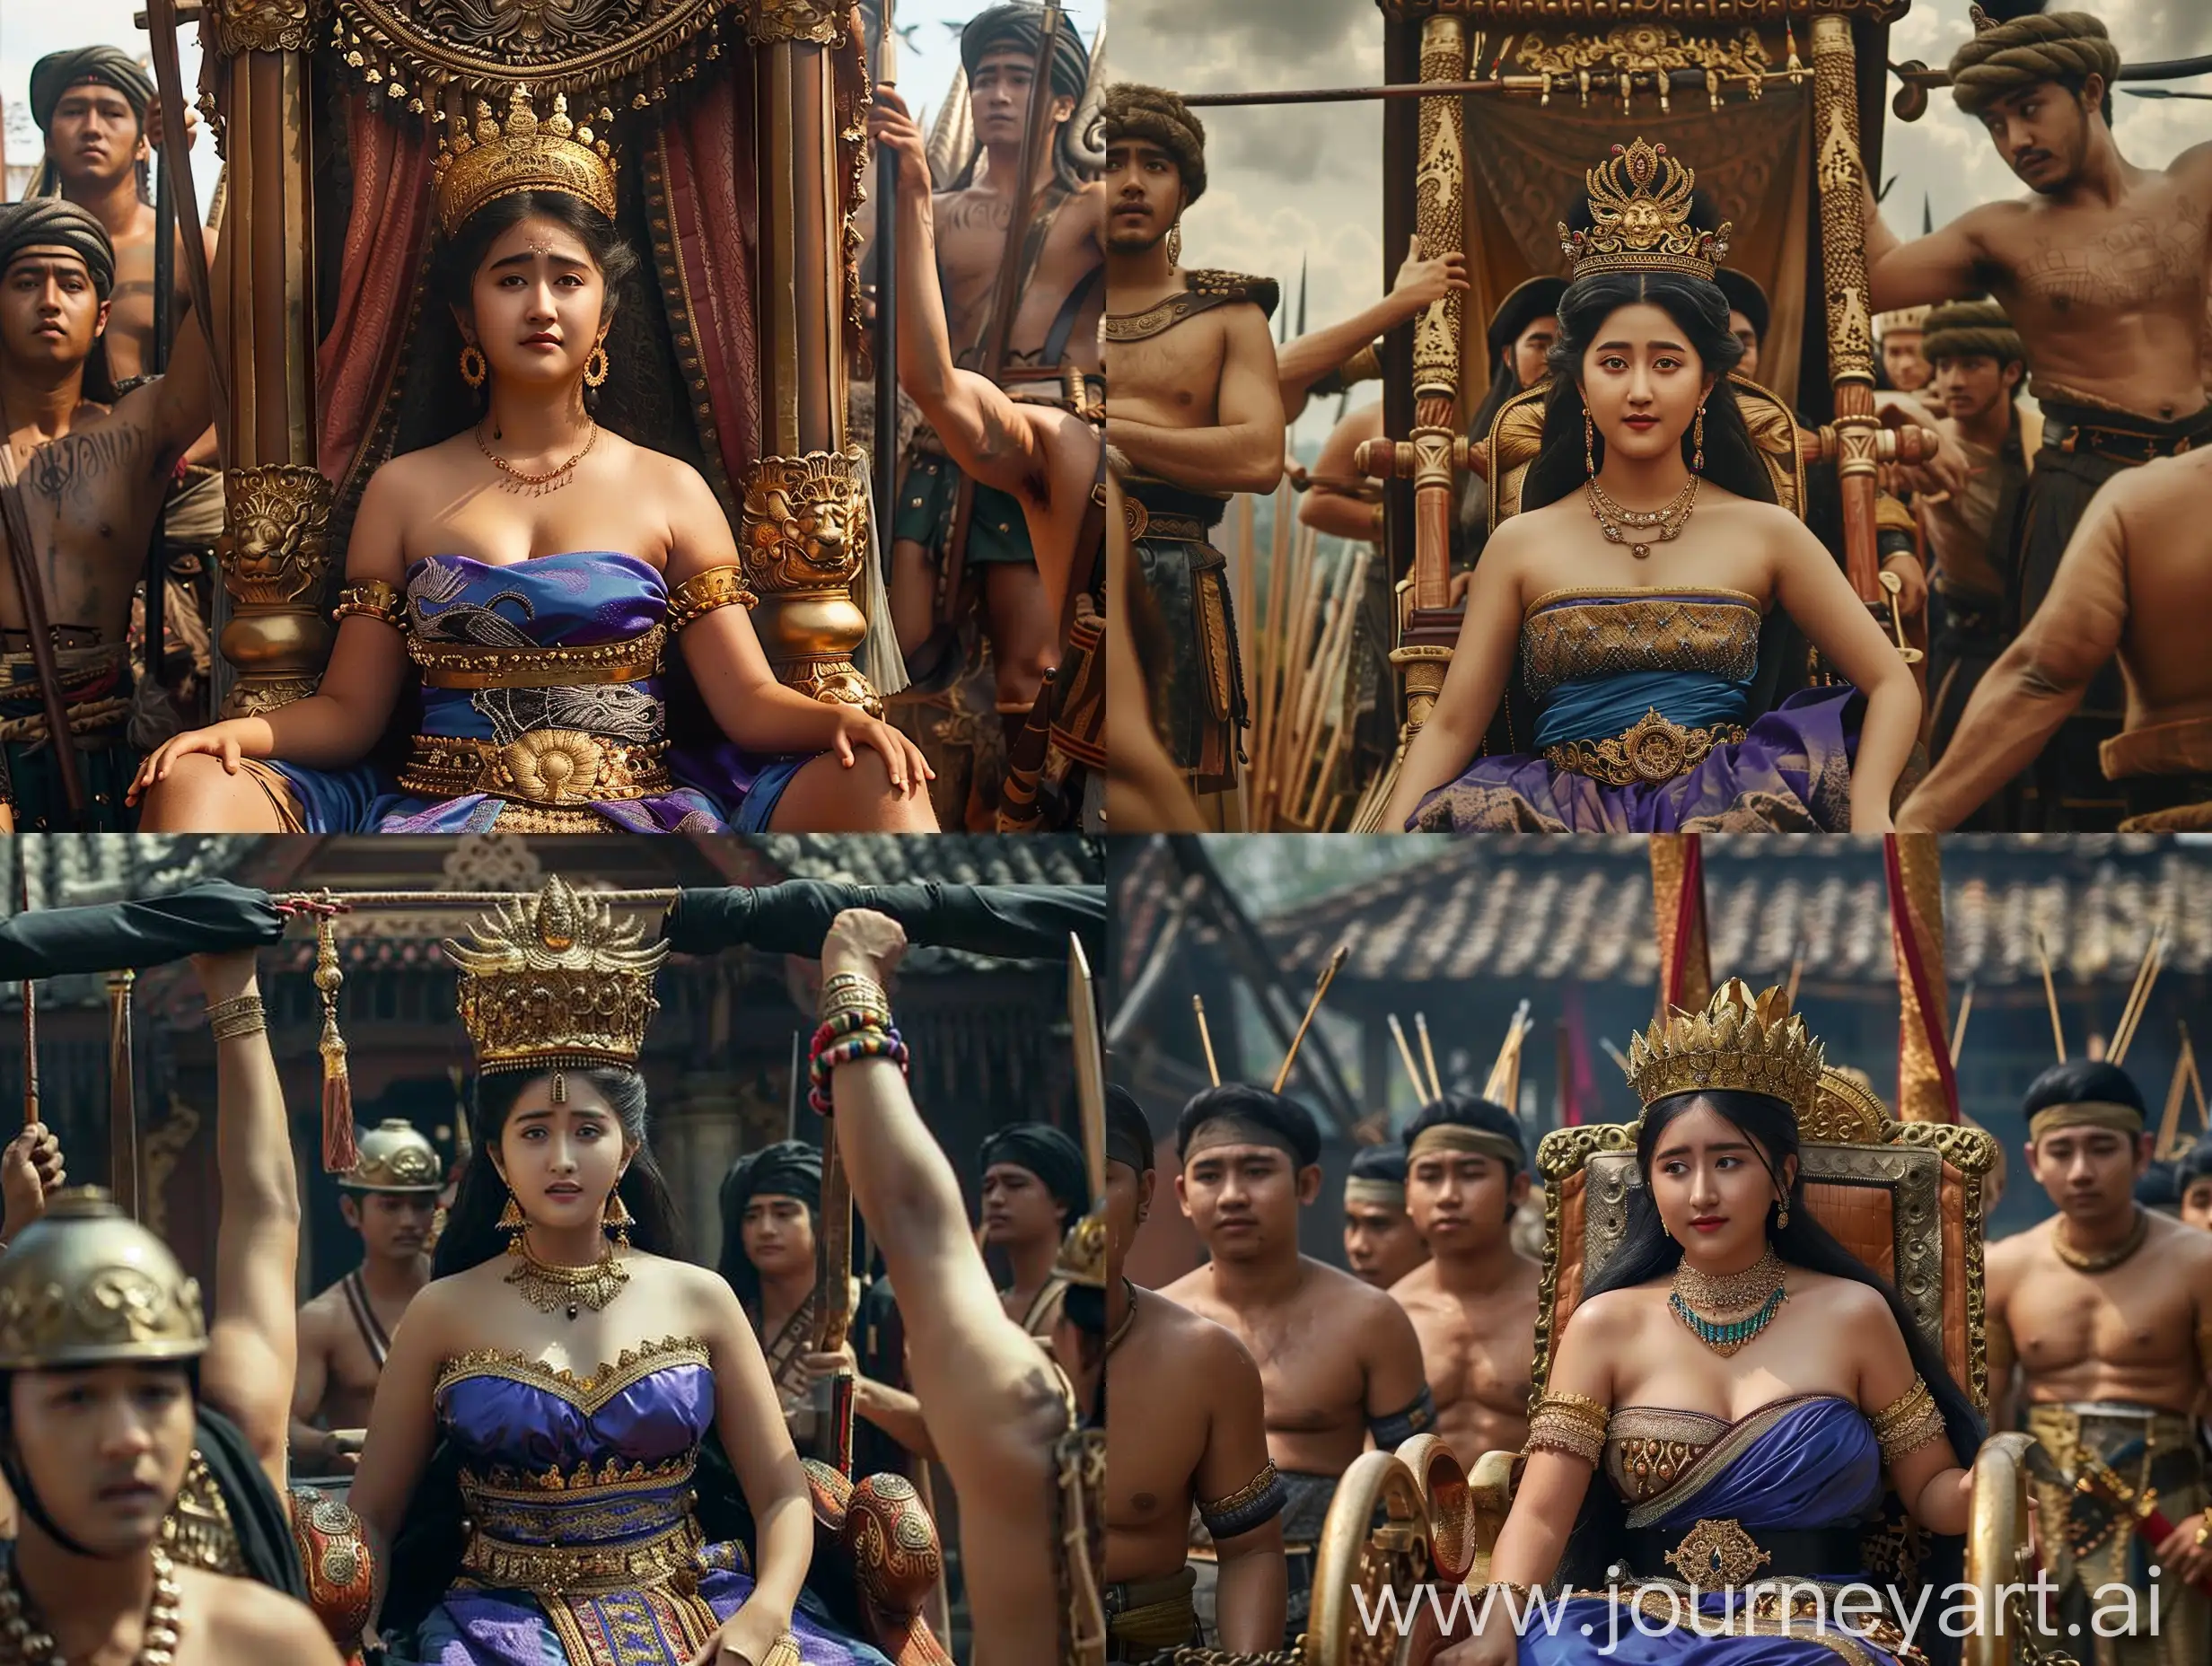 Cinematic movie, Indonesian kingdom of Pajajaran, Dyah pitaloka, 30 years old, sitting in a Palanquin royal palanquin being lifted by his troops, his troops, dressed in war clothes, without a shirt, wearing a black cloth headband,,super realistic, nice detail, --v 6 --ar 16:9